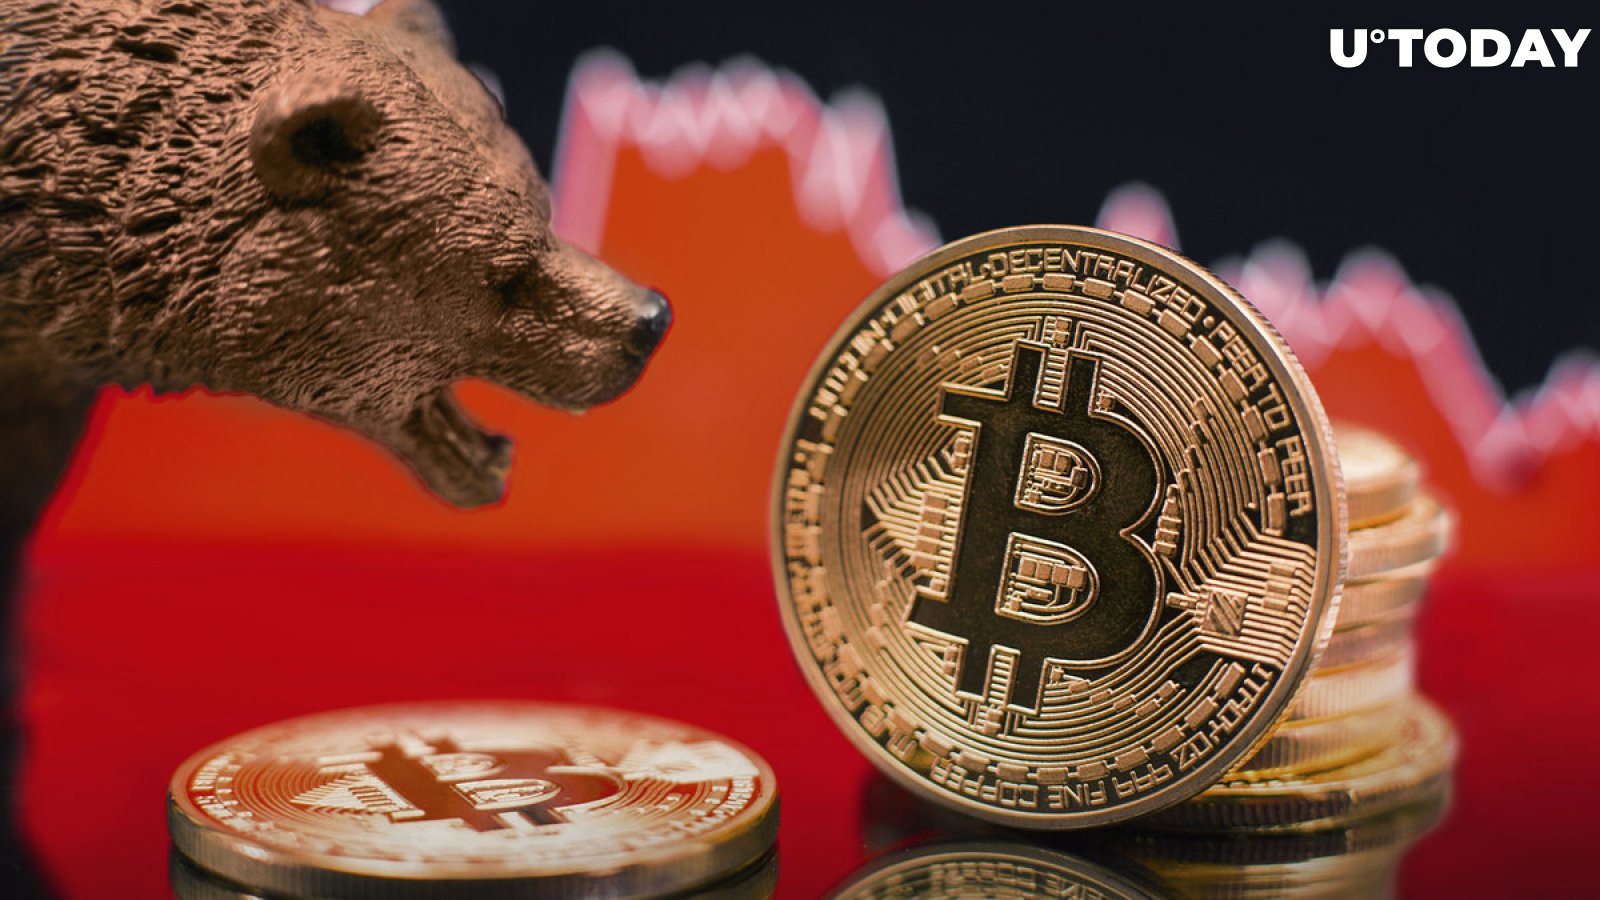 Bitcoin (BTC) Price Collapses Again After Brief Recovery